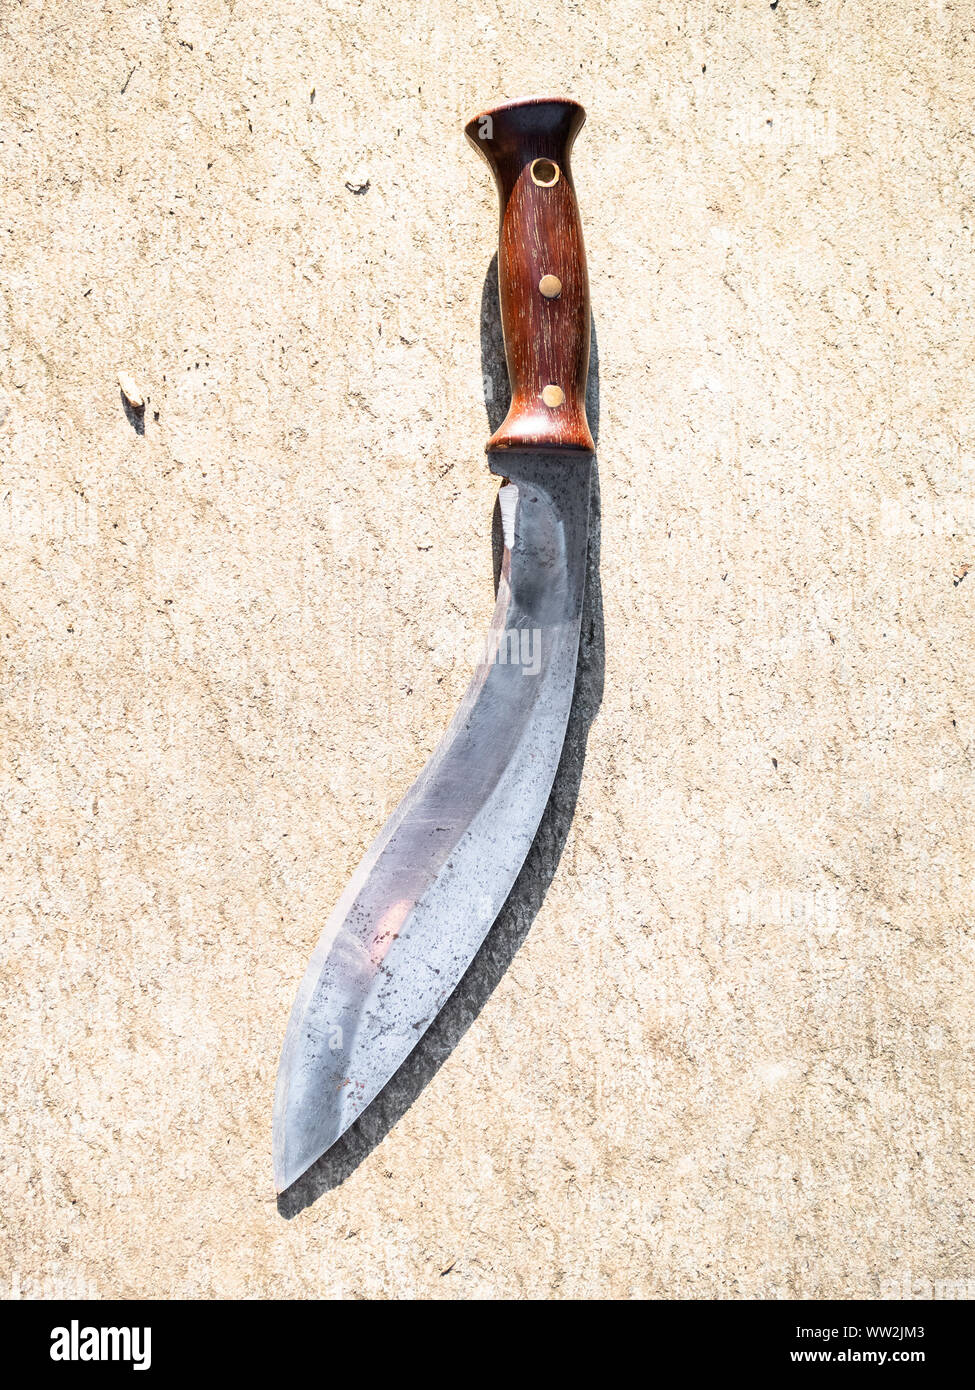 top view of Khukuri traditional Nepali knife on outdoor concrete board Stock Photo